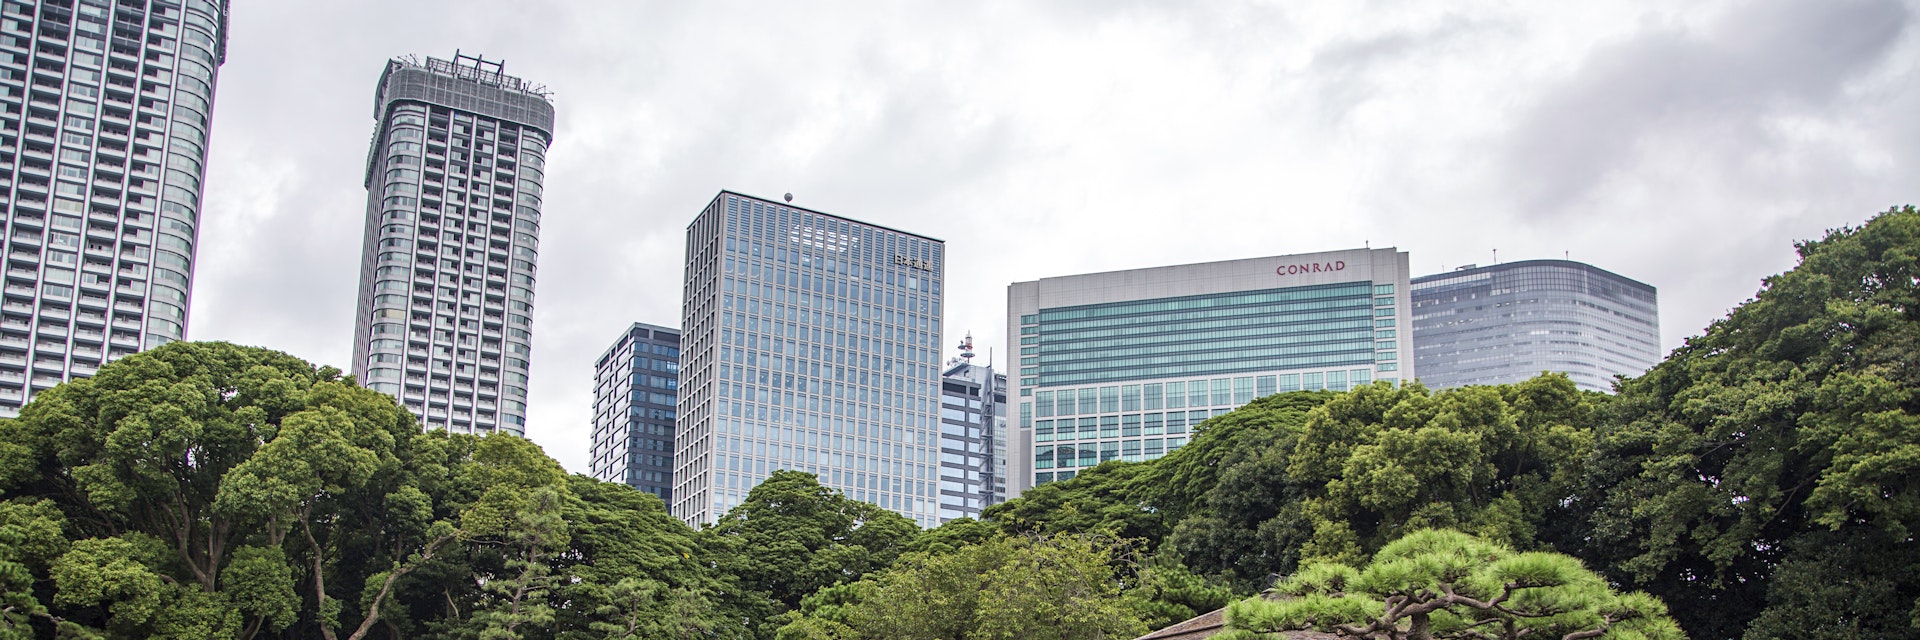 Tokyo, Japan - October 3, 2016: View at modern skyscrapers and  Hamarikyu Gardens in Tokyo. It is a public park opened April 1, 1946.
639141584
Building Exterior, Landscaped, Green Color, Japanese Culture, Urban Scene, Outdoors, Tokyo Prefecture, Japan, Asia, Tree, Plant, Lake, Formal Garden, Park - Man Made Space, City, Hamarikyu